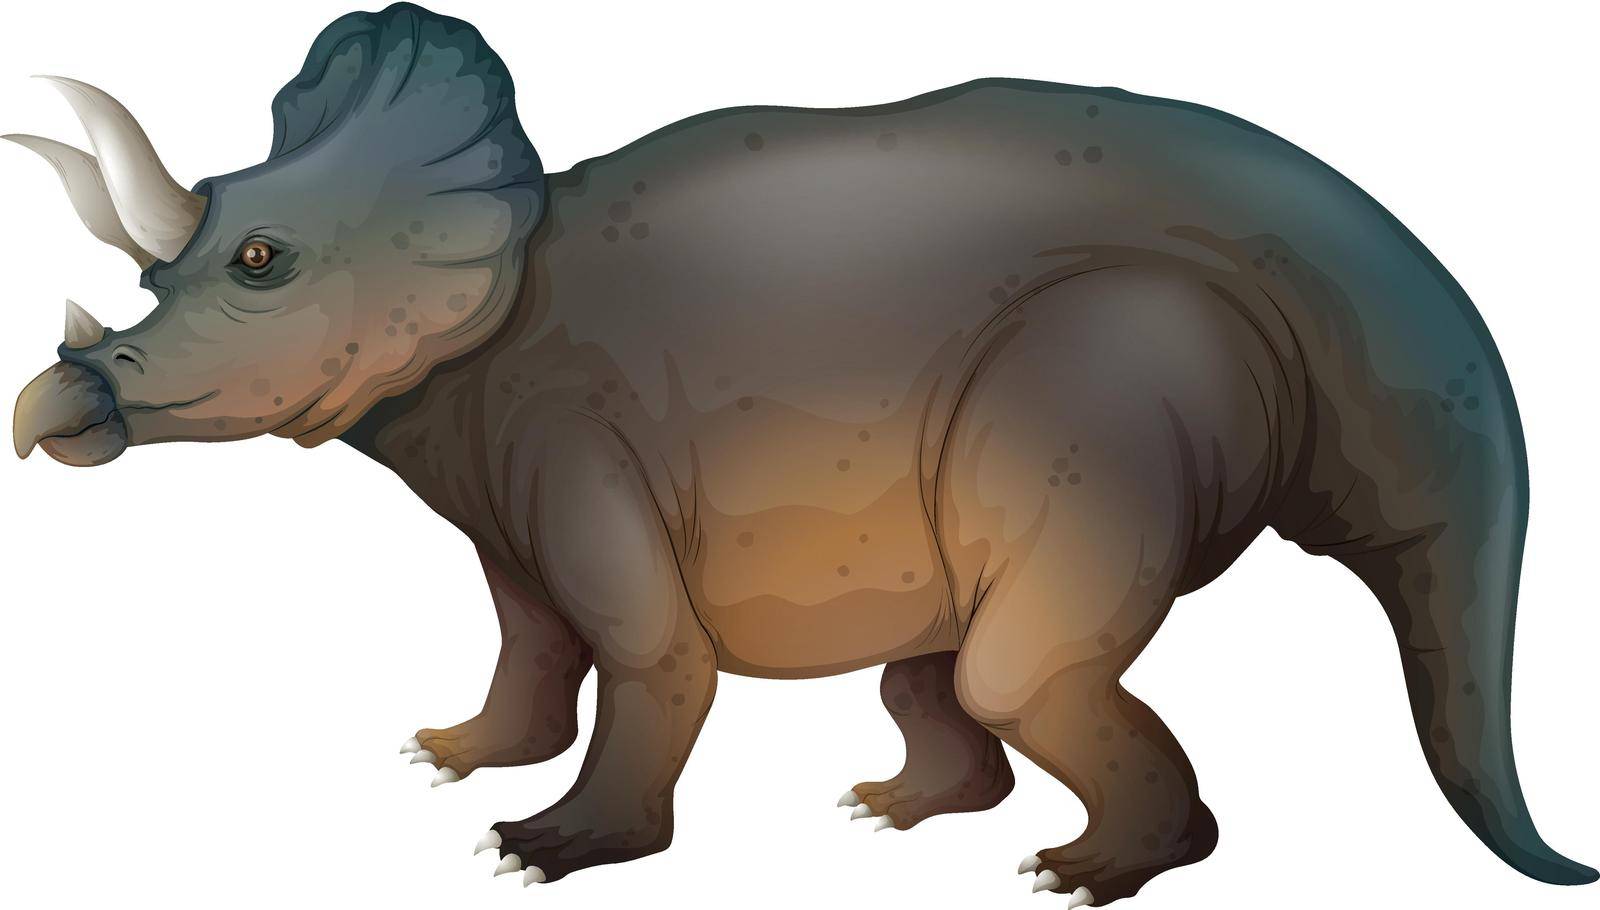 Illustration showing a triceratops